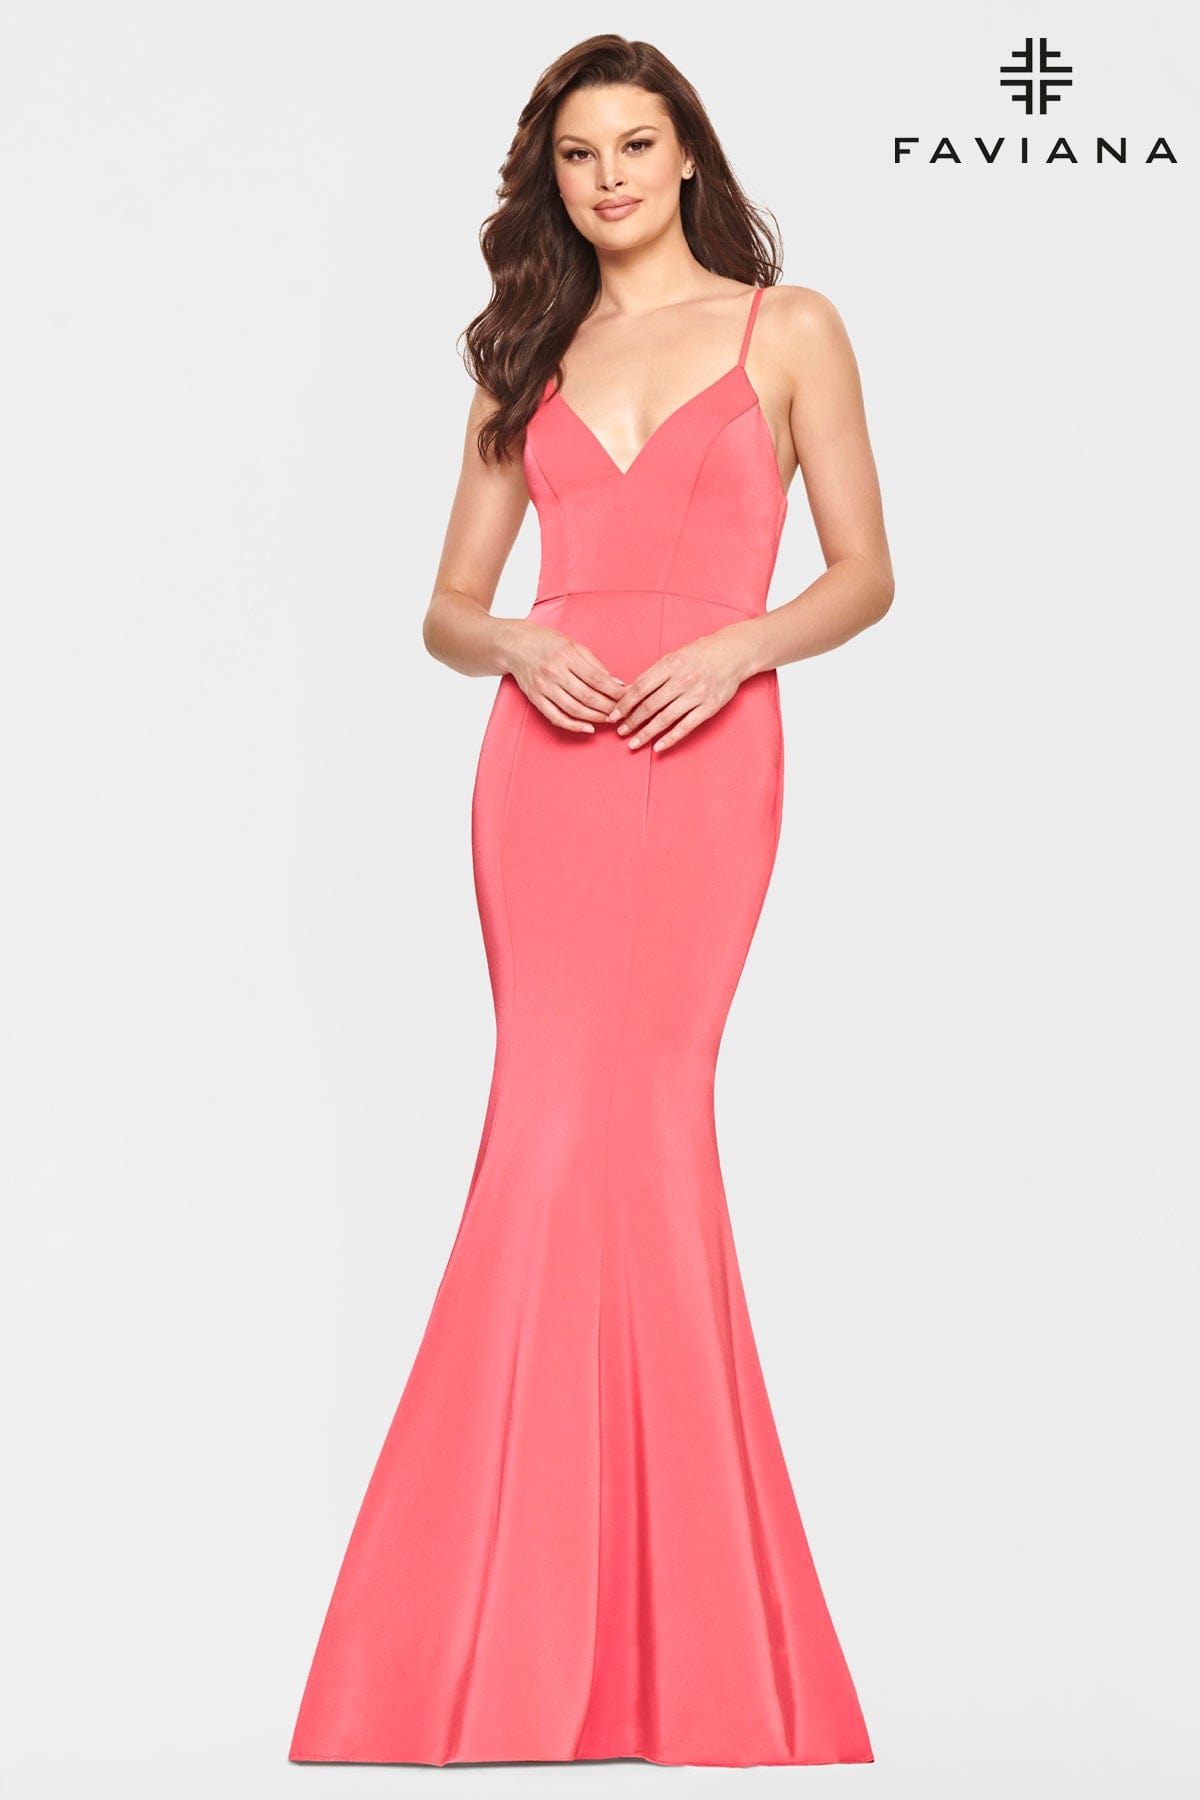 Sweetheart Neckline Long Dress With Fit And Flare Skirt And Corset Back